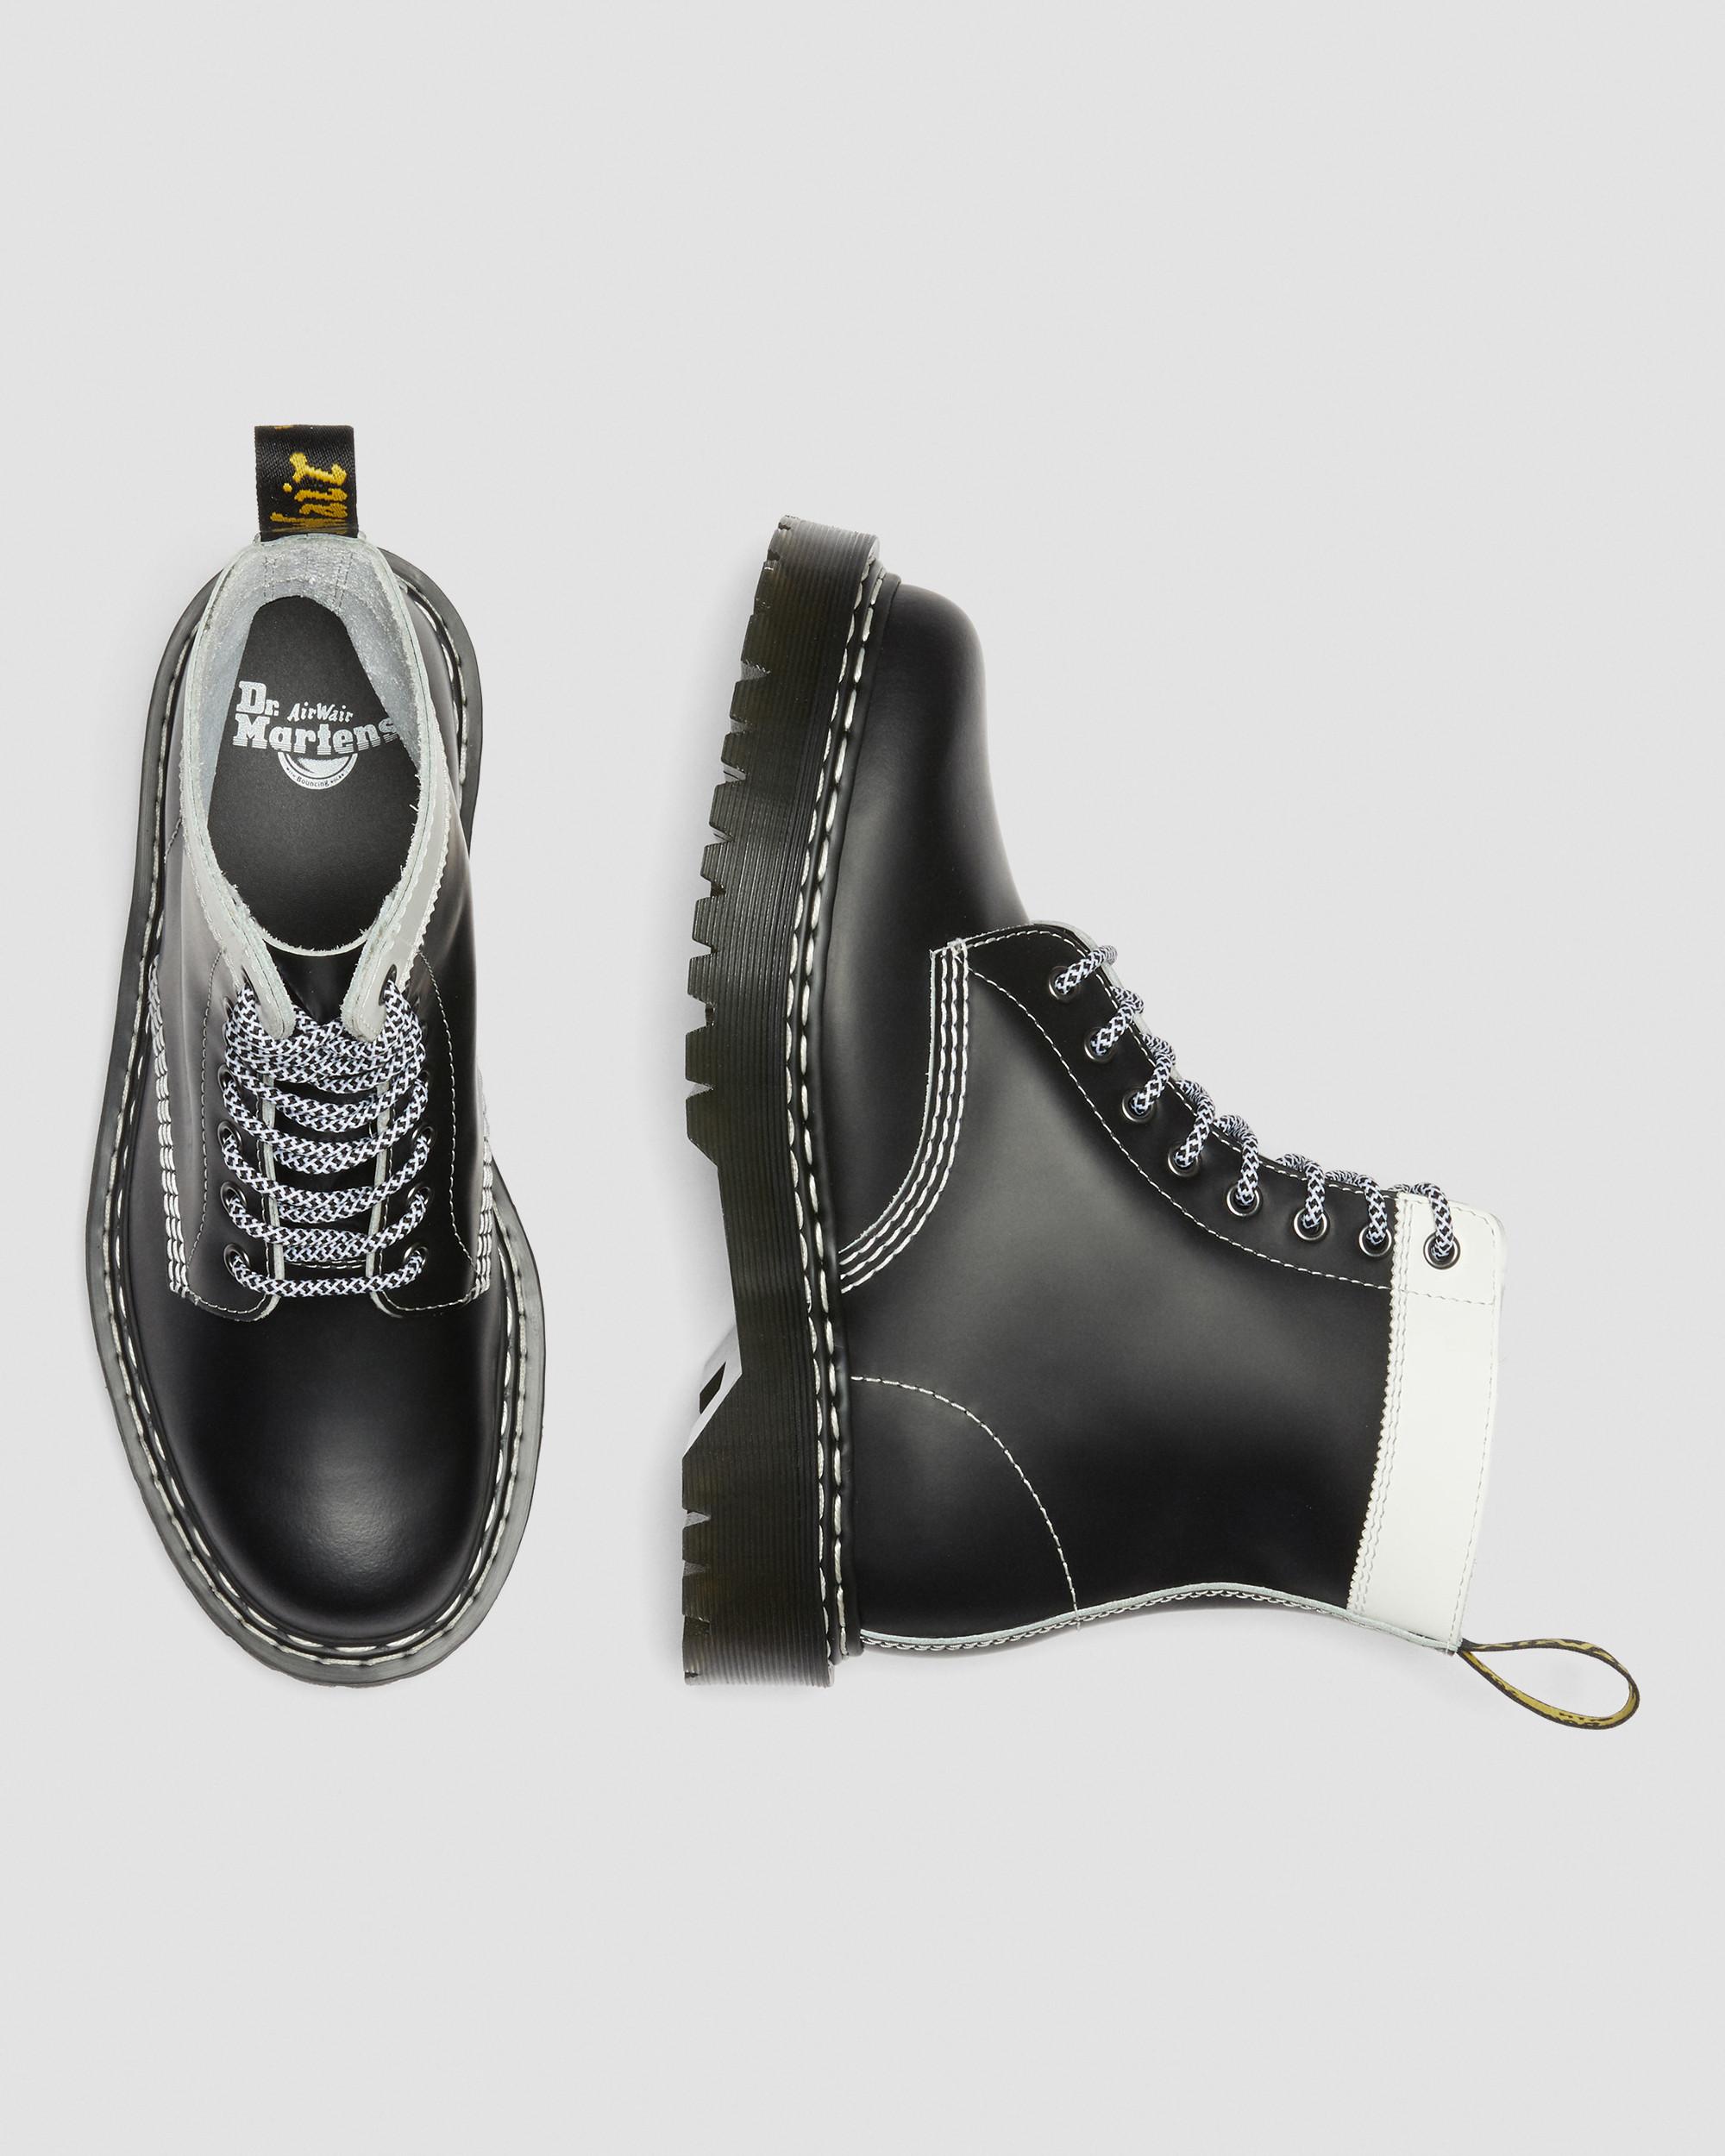 DR MARTENS 1460 Pascal Bex Leather Contrast Lace Up Boots